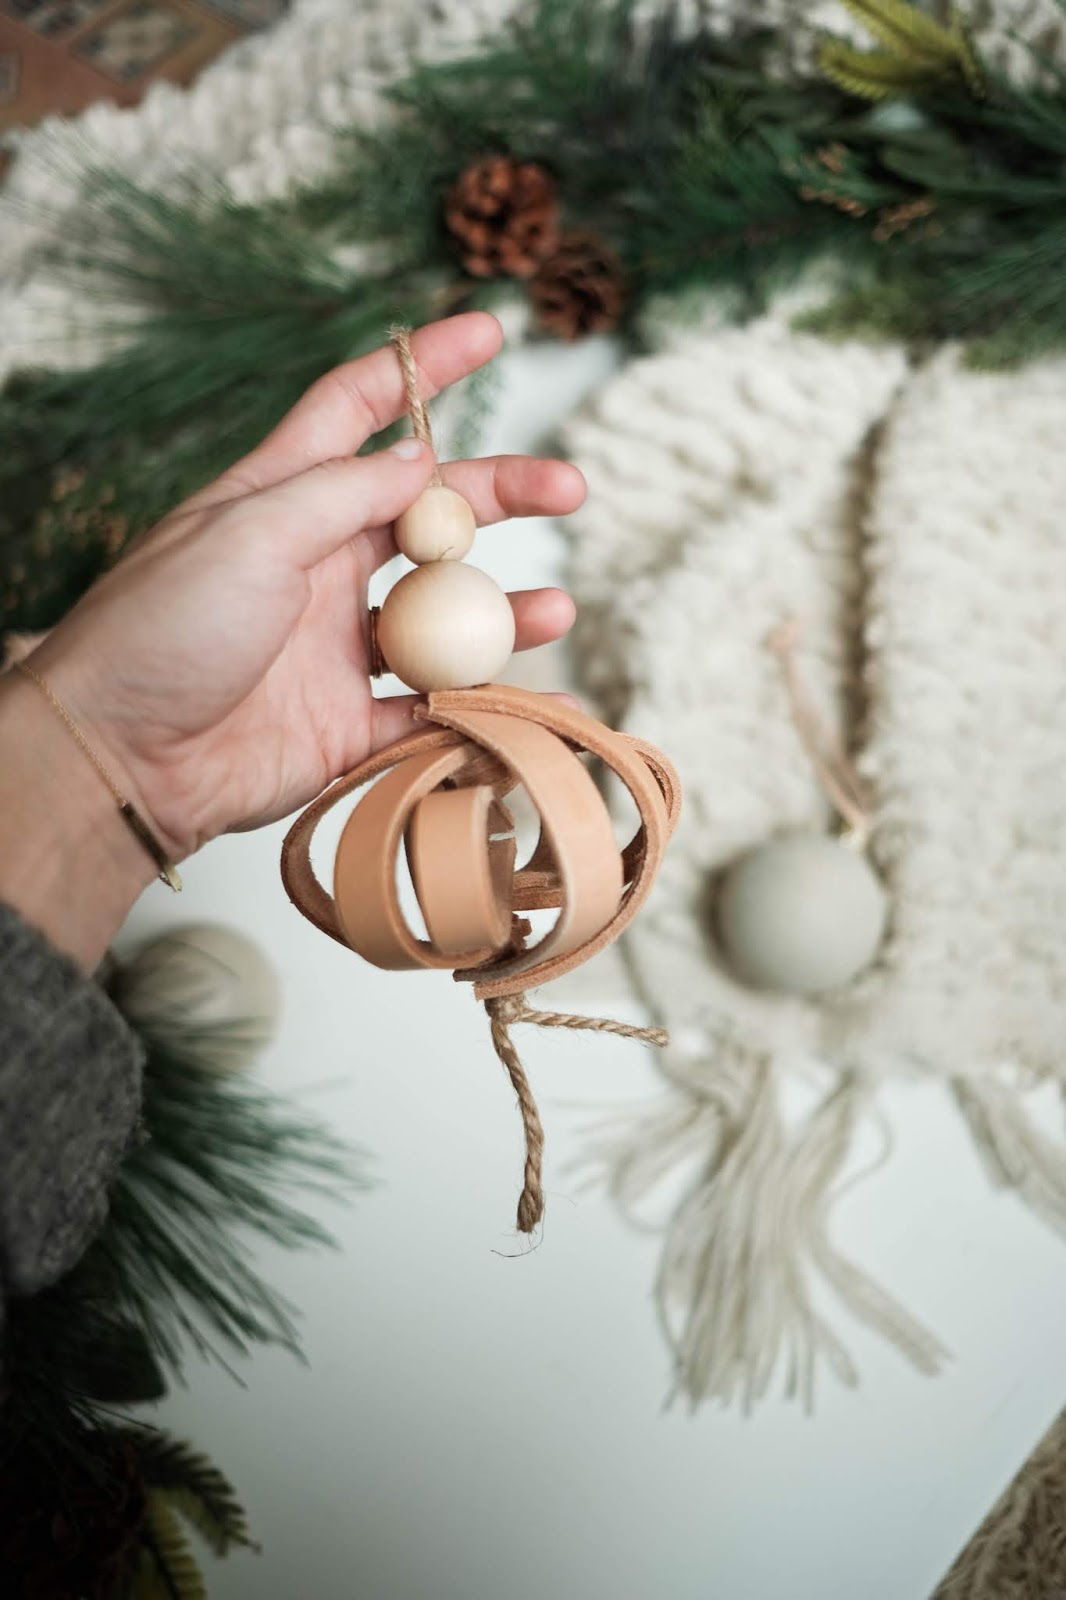 DIY tan 3D leather Christmas ornament with wooden beads (via www.alwaysrooney.com)